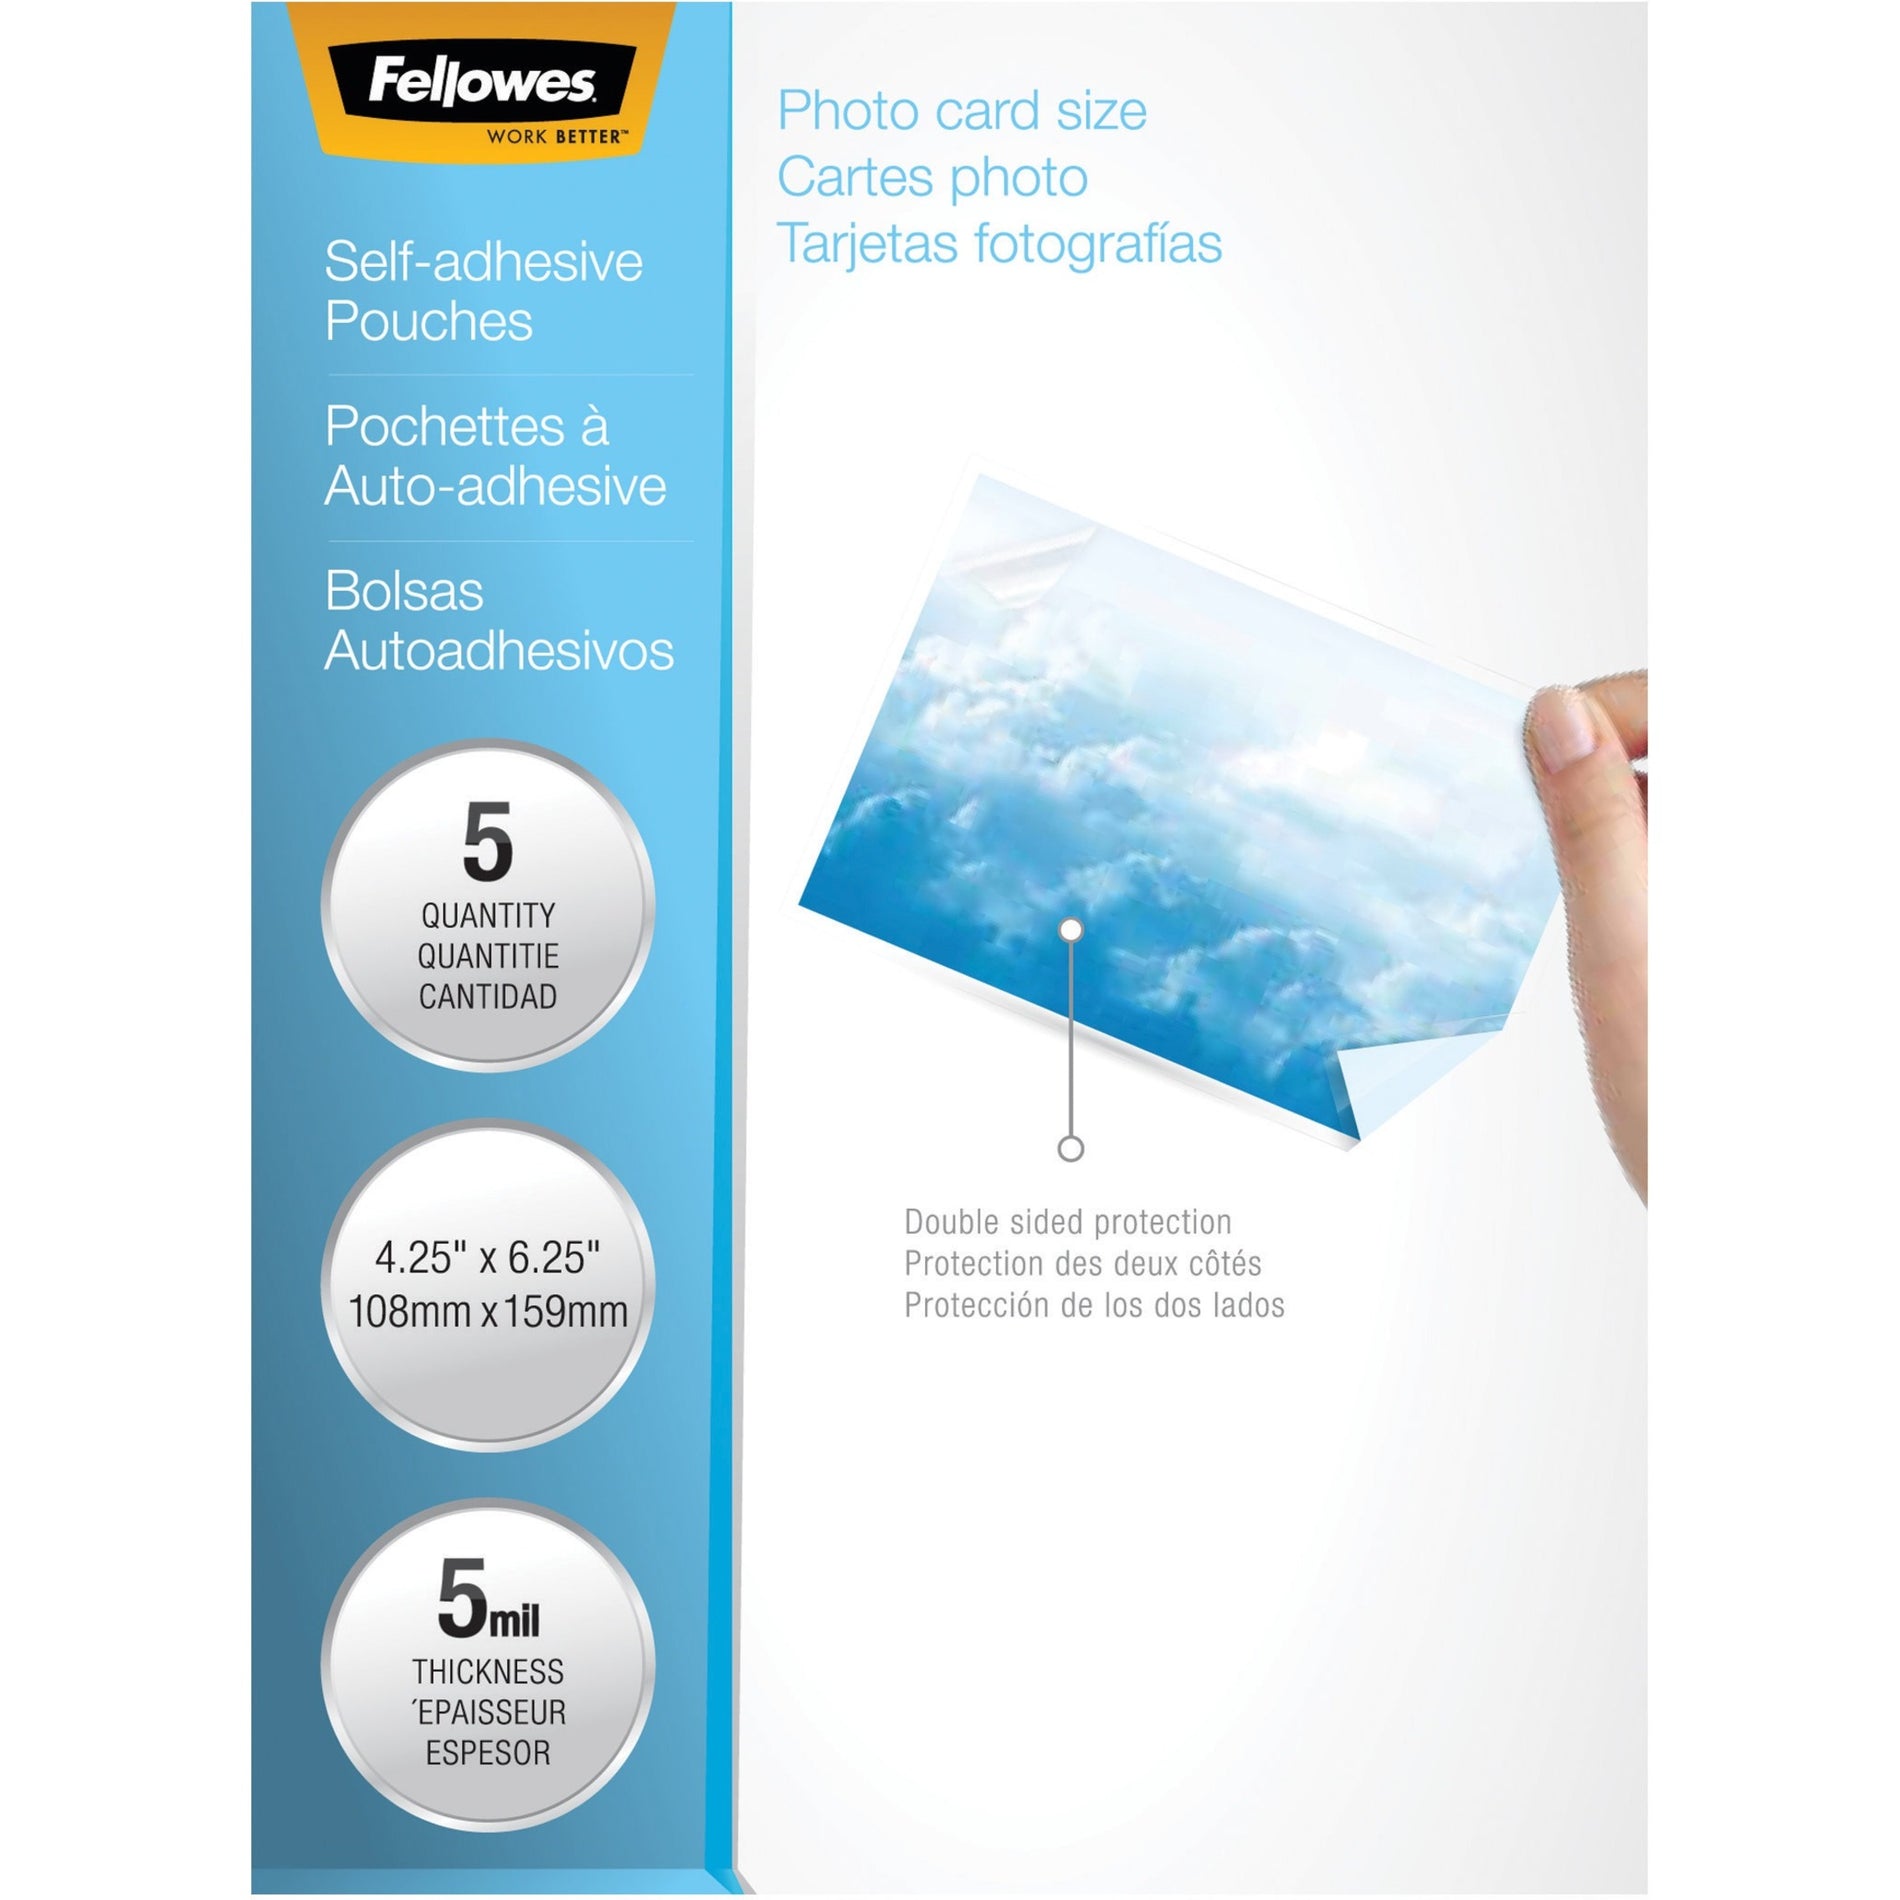 Fellowes 5220401 Self-Adhesive Pouches - Photo, 5mil, 5 Pack, Durable, Cold-run, Clear